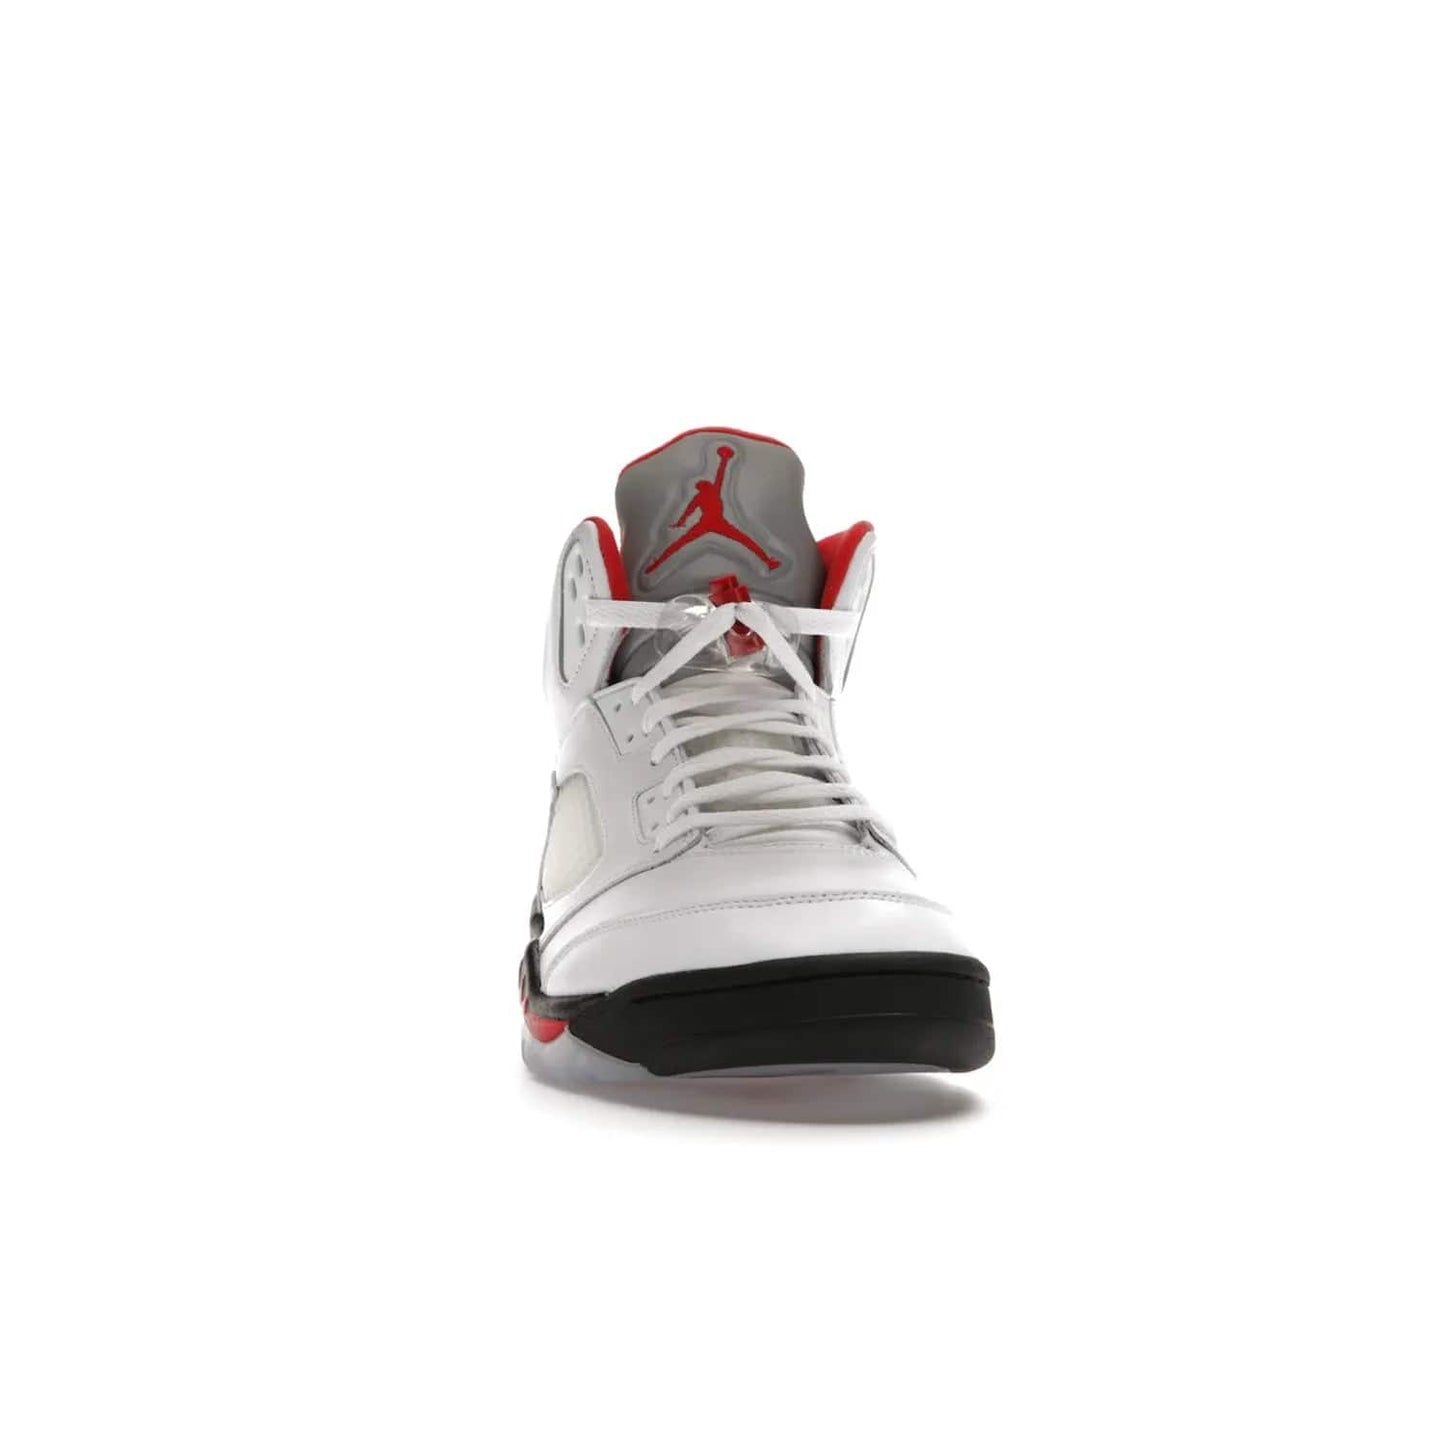 Jordan 5 Retro Fire Red Silver Tongue (2020) - Image 9 - Only at www.BallersClubKickz.com - Experience classic styling with the Jordan 5 Retro Fire Red Silver Tongue (2020). Features a white leather upper, 3M reflective tongue, midsole colorblocking, and an icy translucent outsole. Now available, upgrade your shoe collection today.